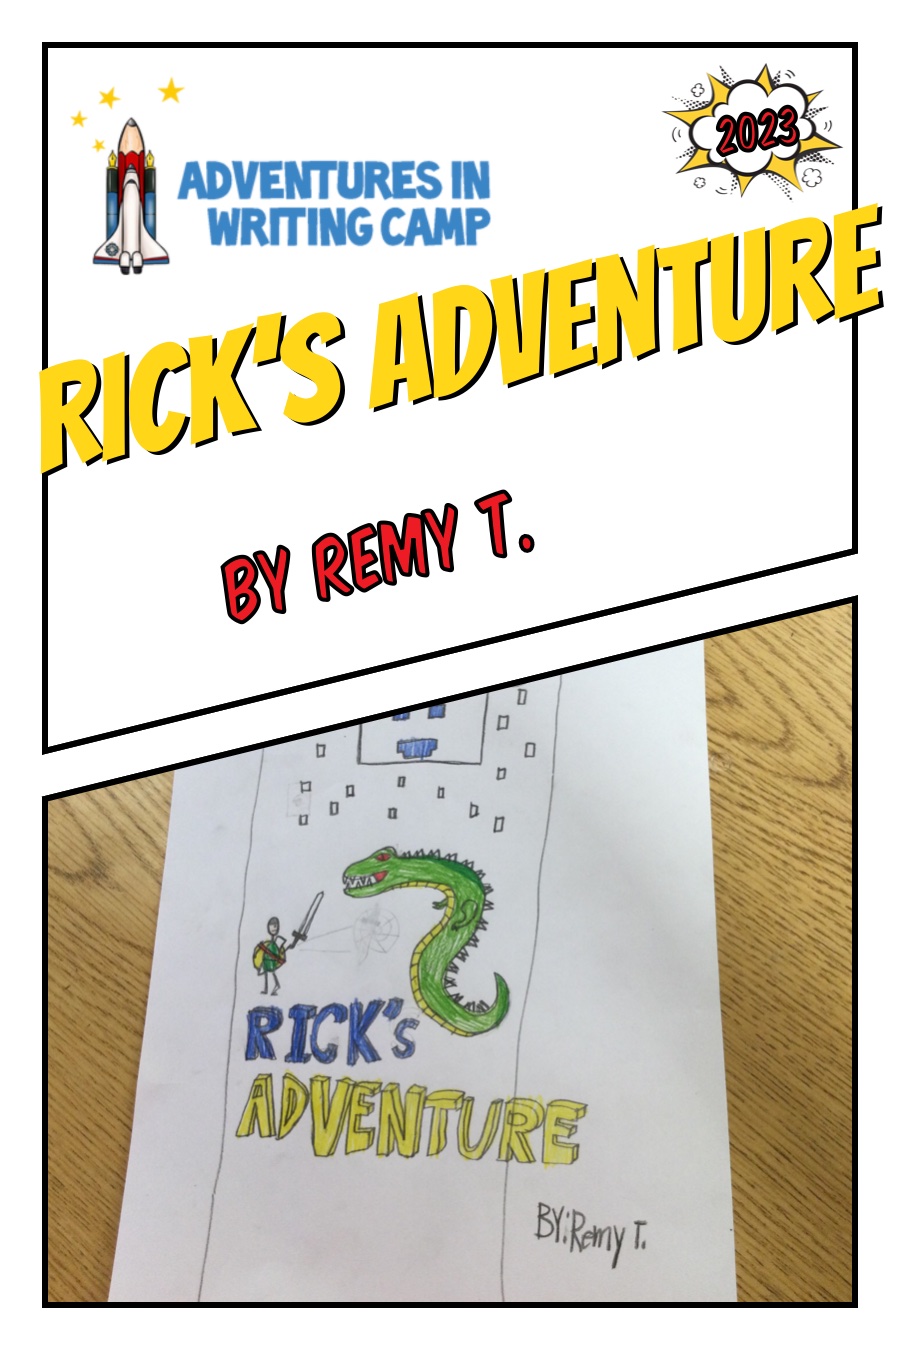 Ricks Adventure by Remy T